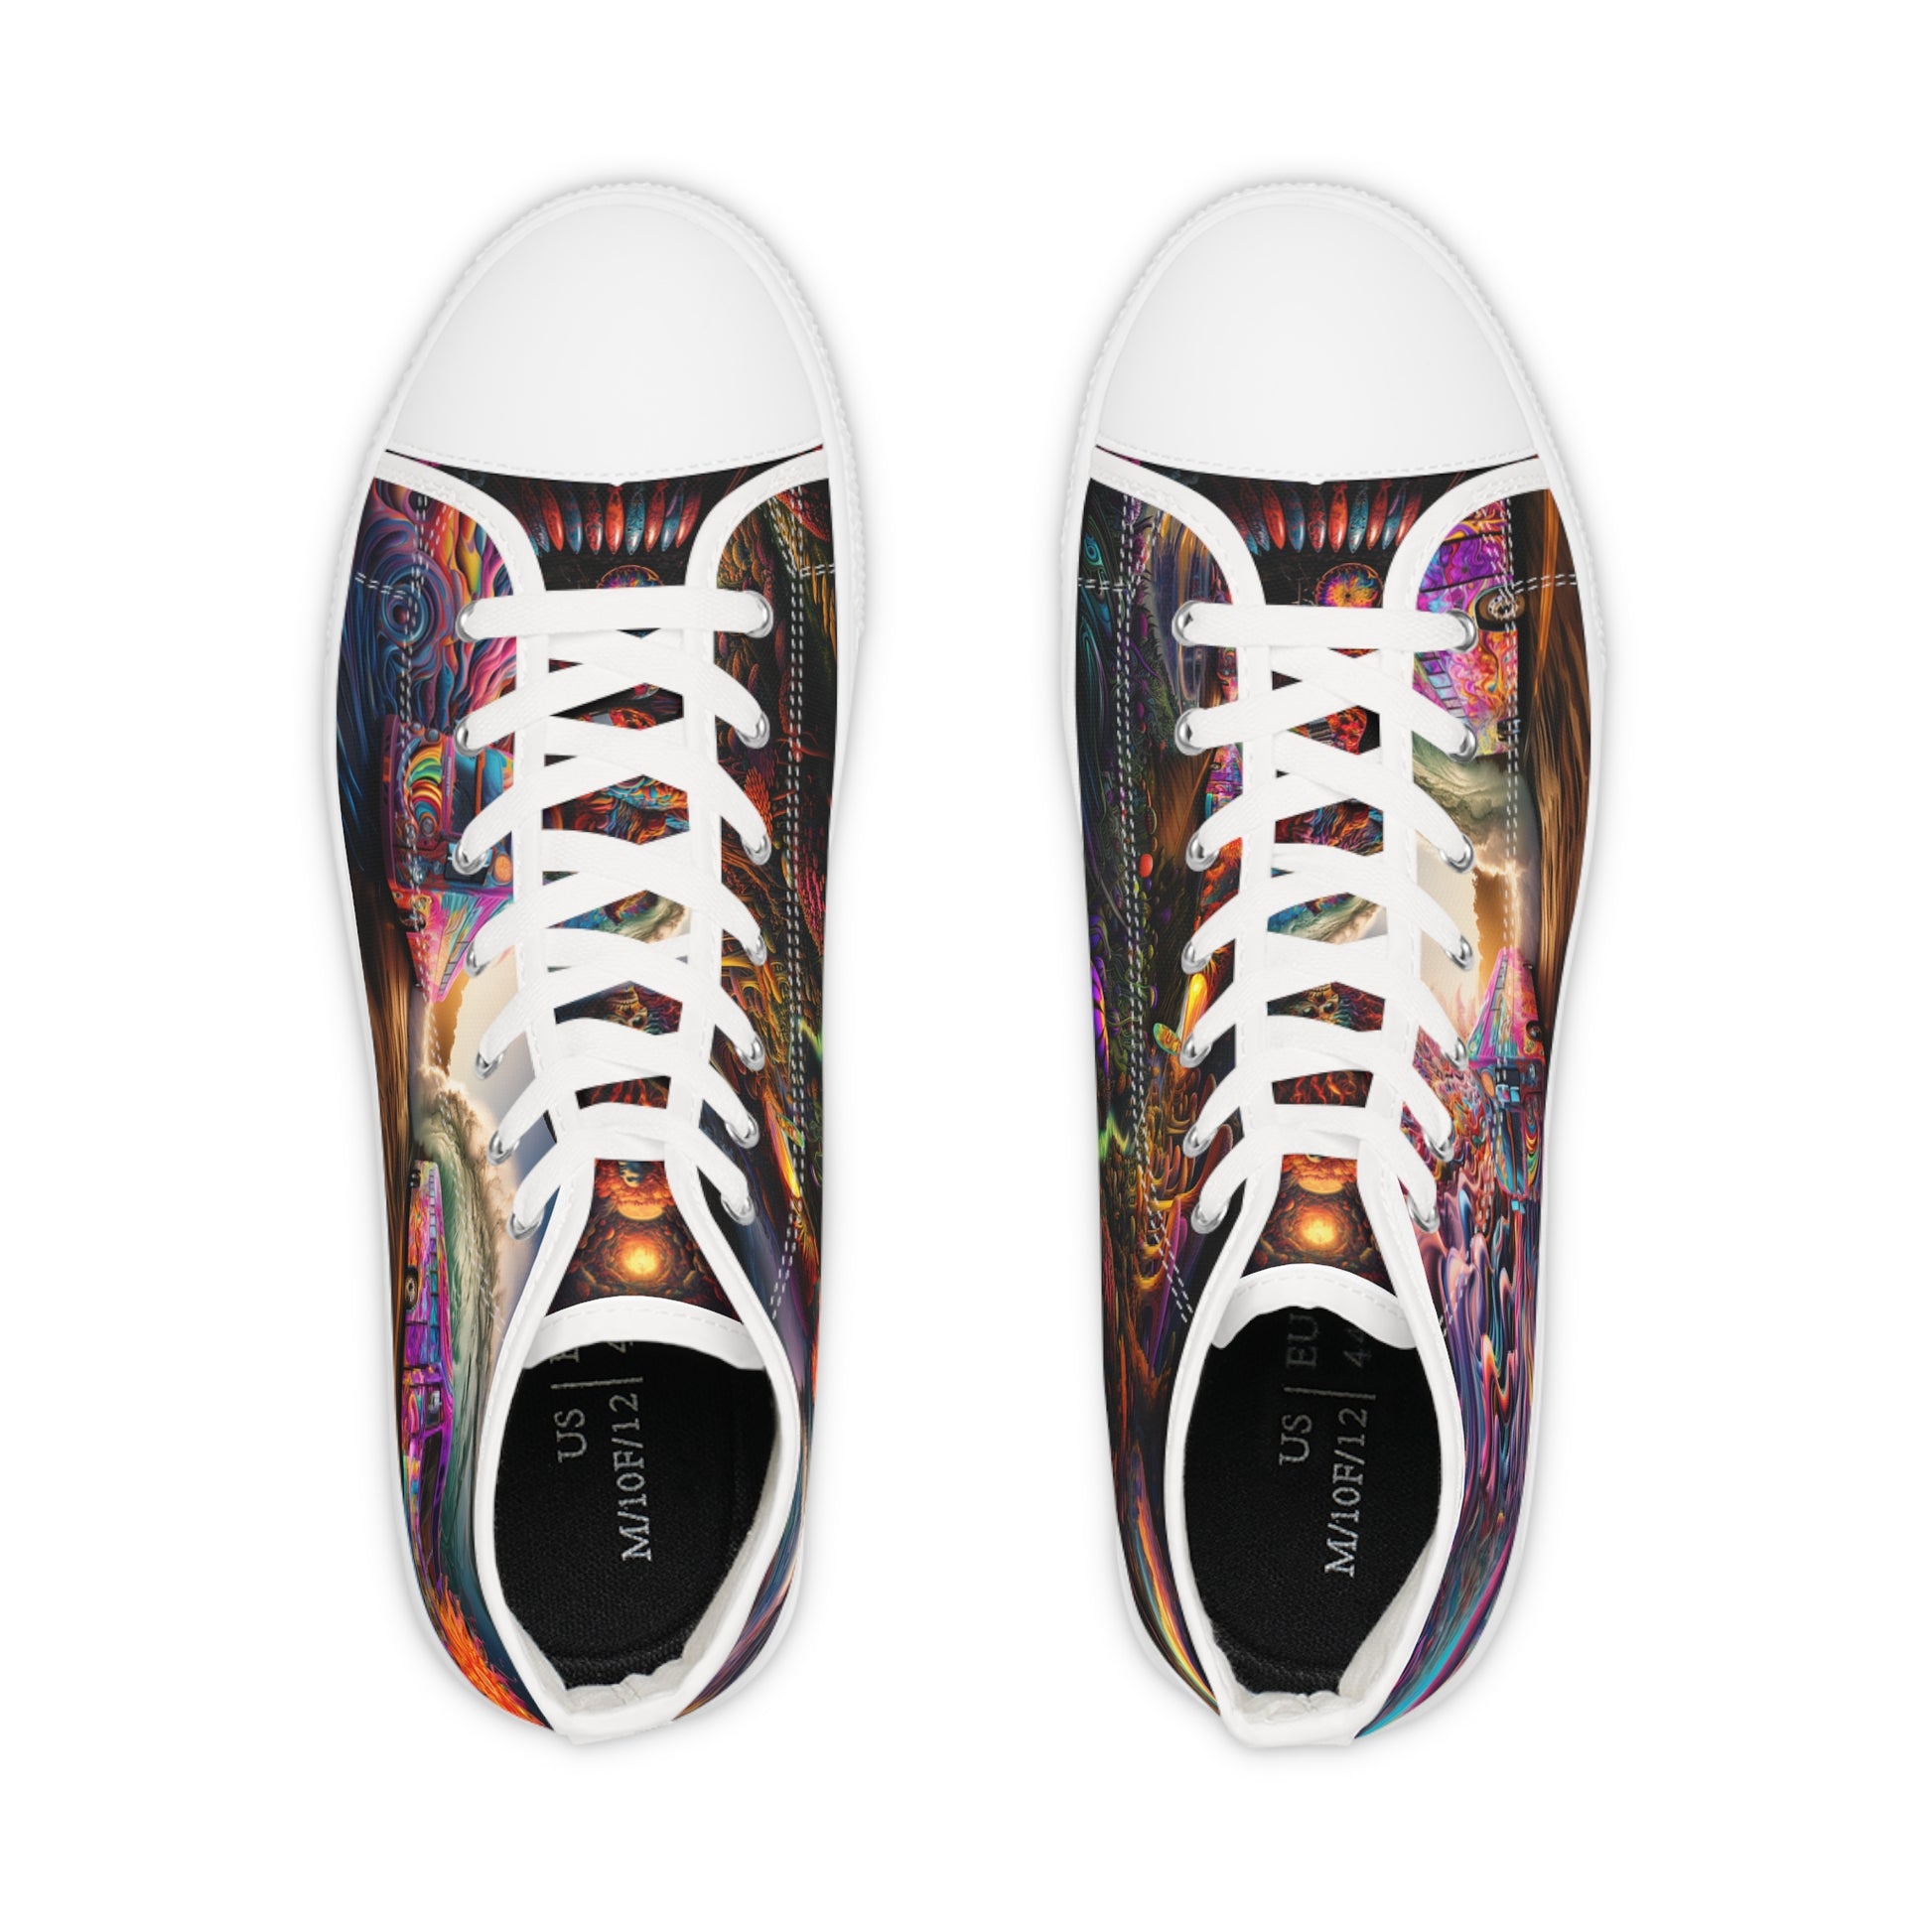 Walk on the Wild Side with our Psychedelic High Top Sneakers #001. Where fashion meets the cosmos, exclusively at Stashbox.ai.